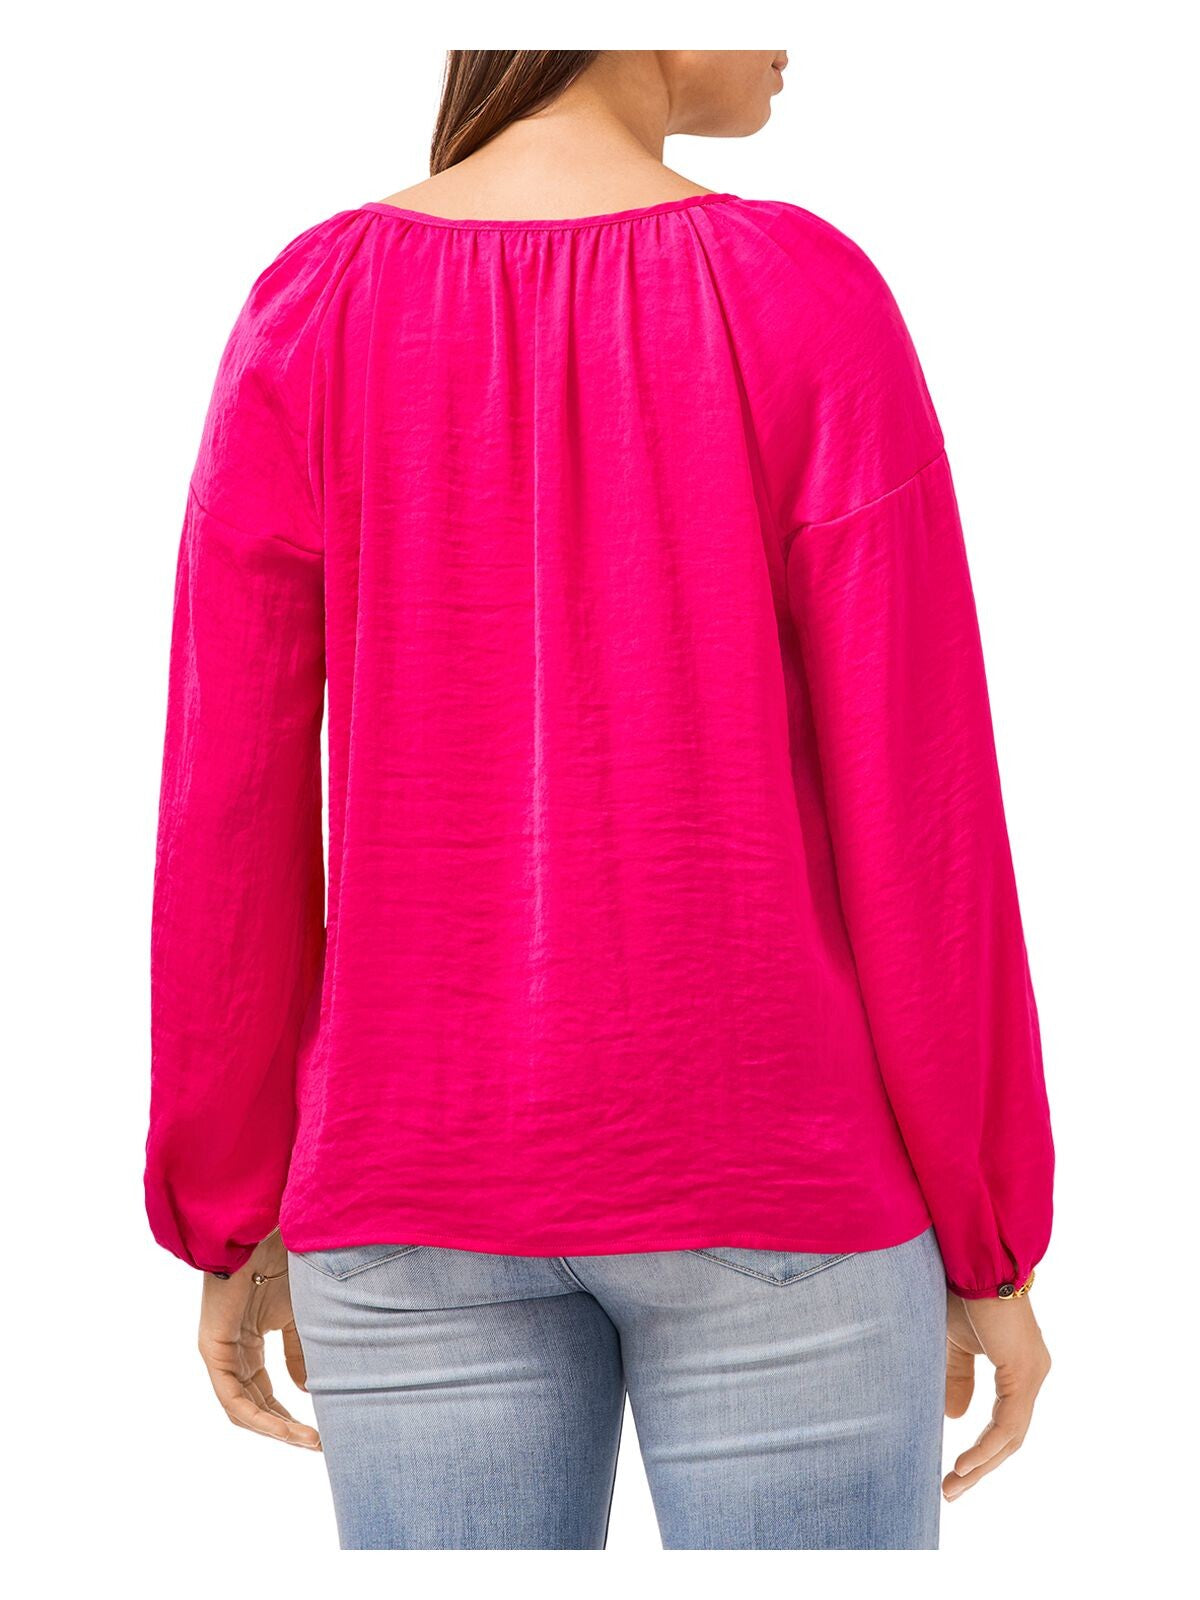 VINCE CAMUTO Womens Pink Gathered Curved Hem Long Sleeve Keyhole Wear To Work Peasant Top XS